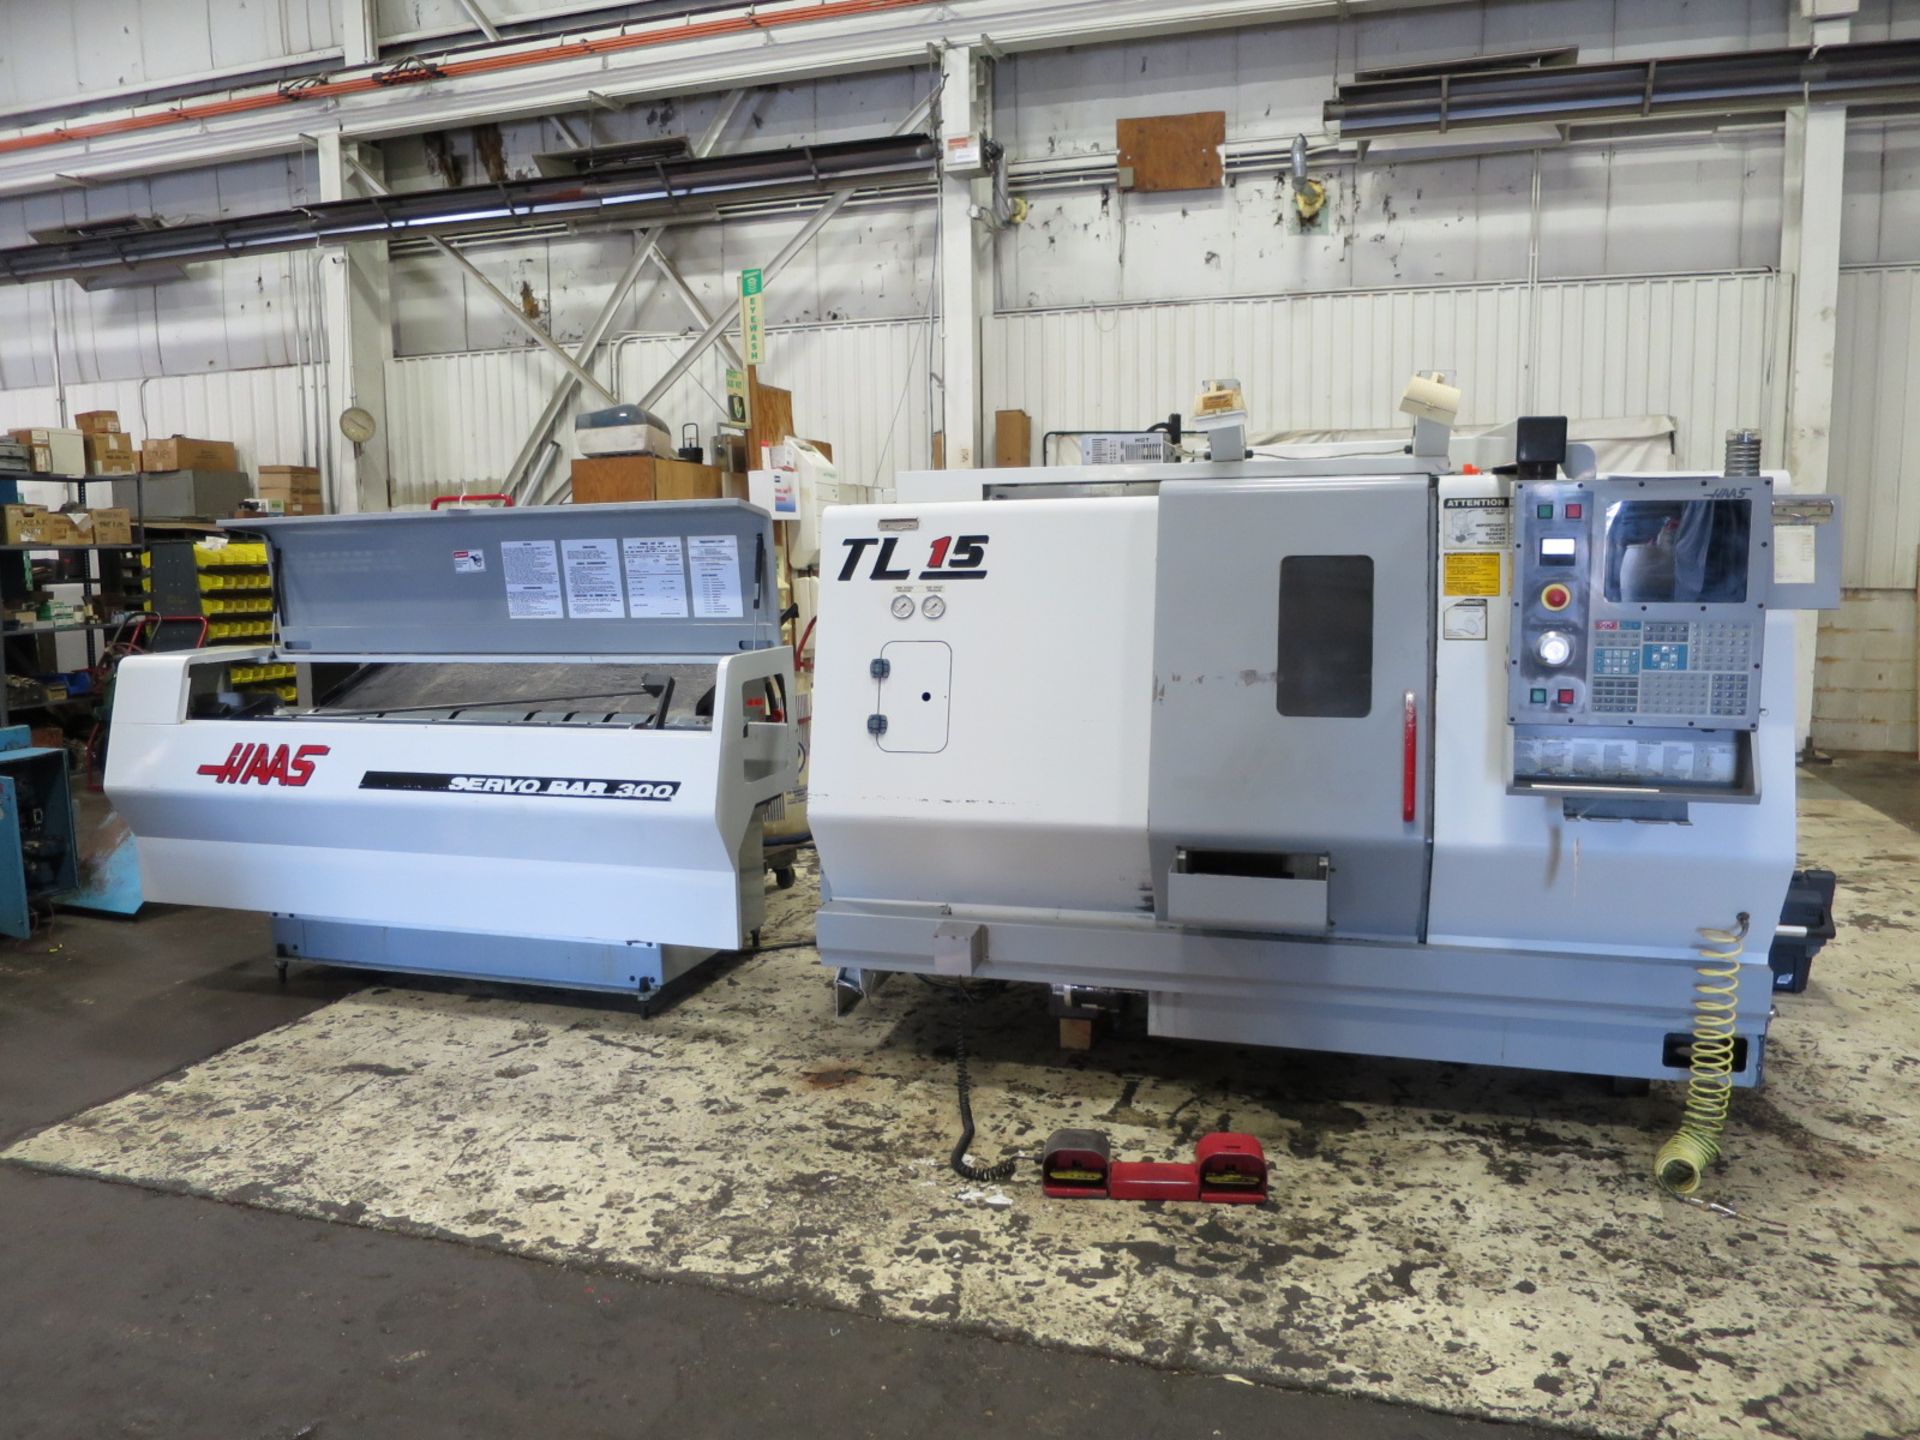 Haas TL-15 CNC lathe with Sub Spindle and Live Tooling, S/N 64985, New 2002 General